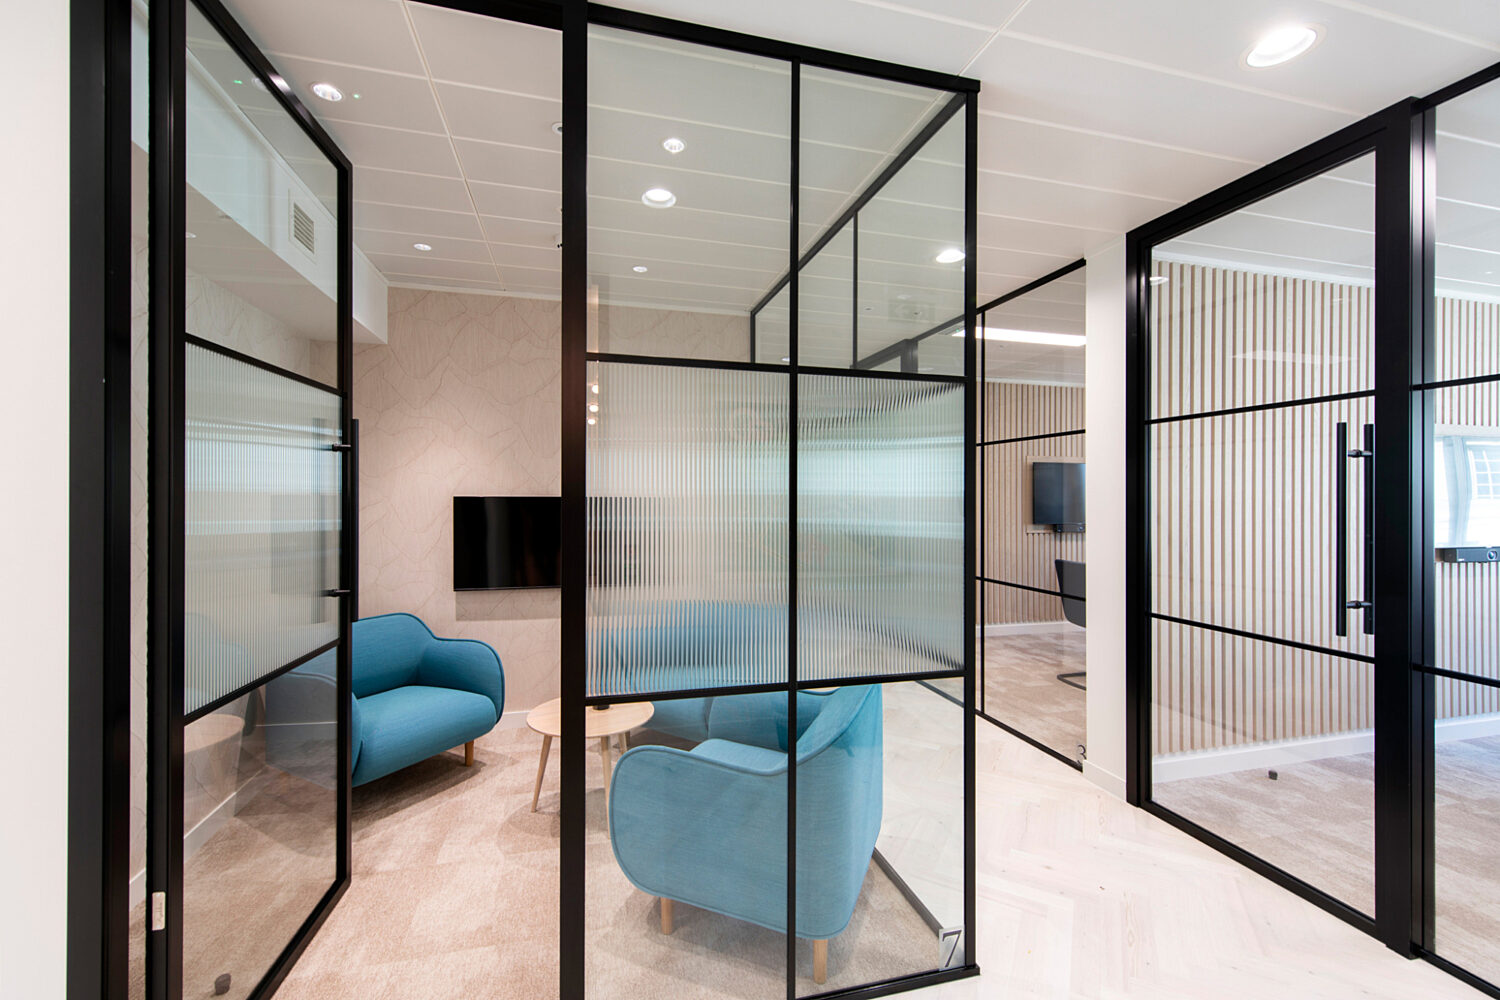 Glazed meeting rooms in London office